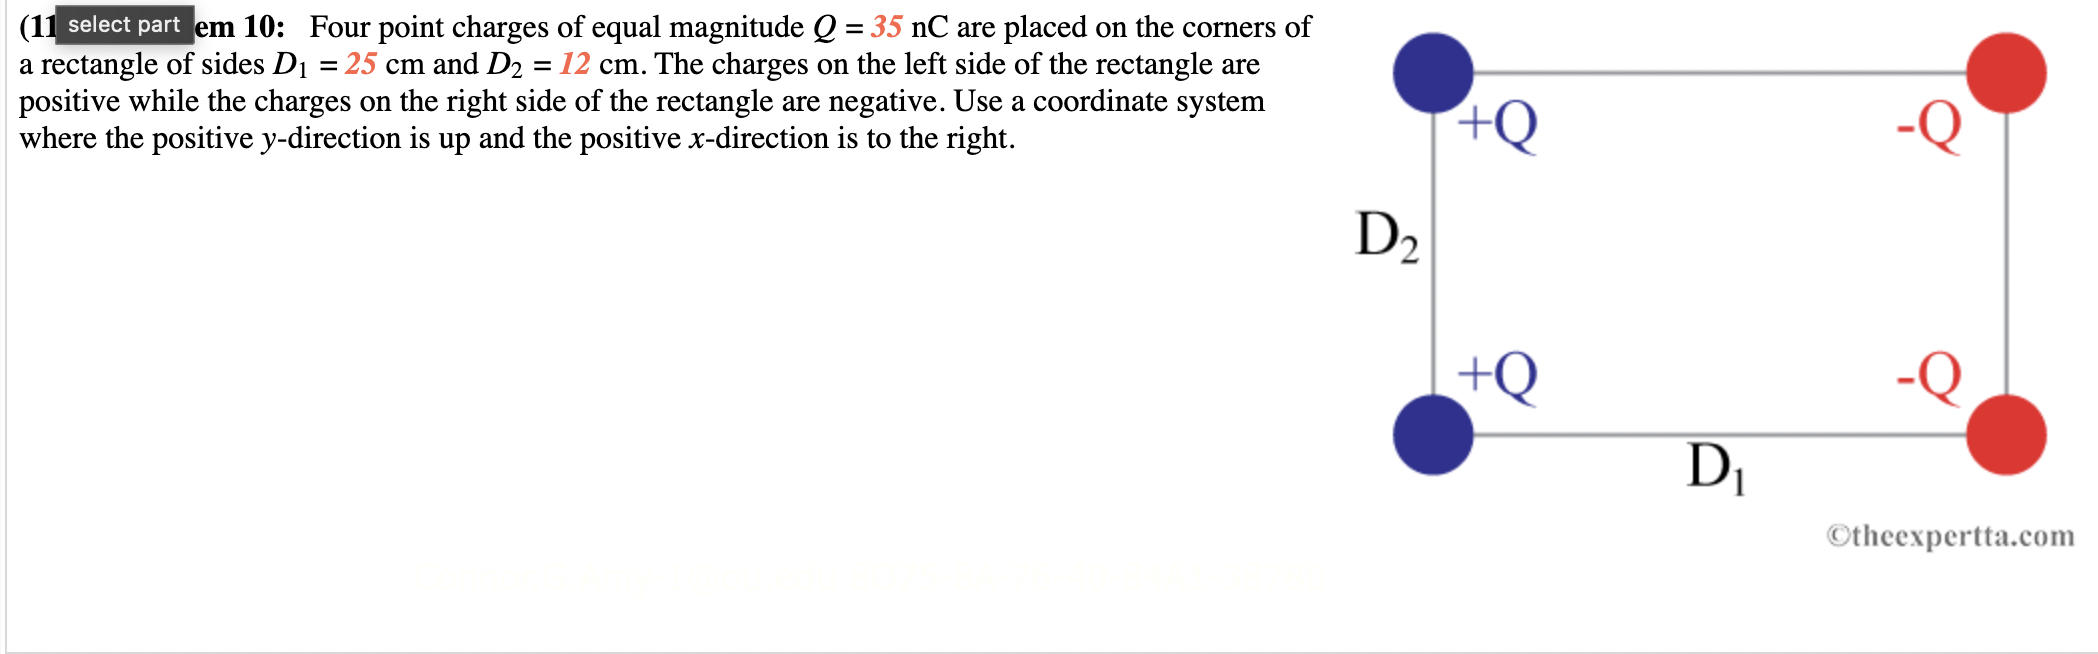 (11 select part em 10: Four point charges of equal magnitude \( Q=35 \mathrm{nC} \) are placed on the corners of a rectangle 